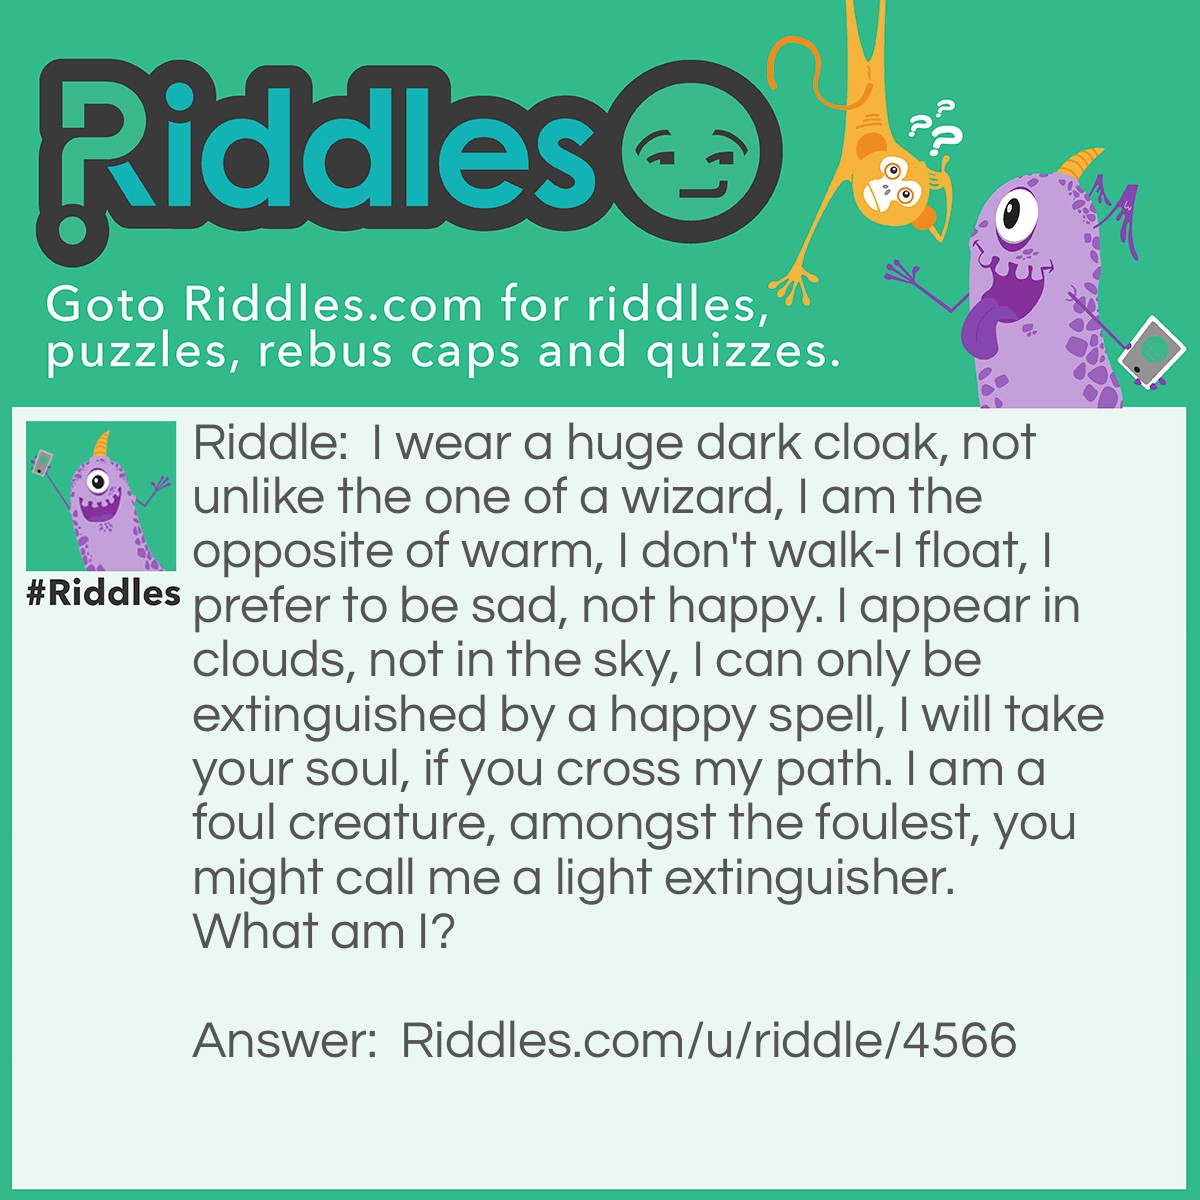 Riddle: I wear a huge dark cloak, not unlike the one of a wizard, I am the opposite of warm, I don't walk-I float, I prefer to be sad, not happy. I appear in clouds, not in the sky, I can only be extinguished by a happy spell, I will take your soul, if you cross my path. I am a foul creature, amongst the foulest, you might call me a light extinguisher.  What am I? Answer: A dementor from Harry Potter.